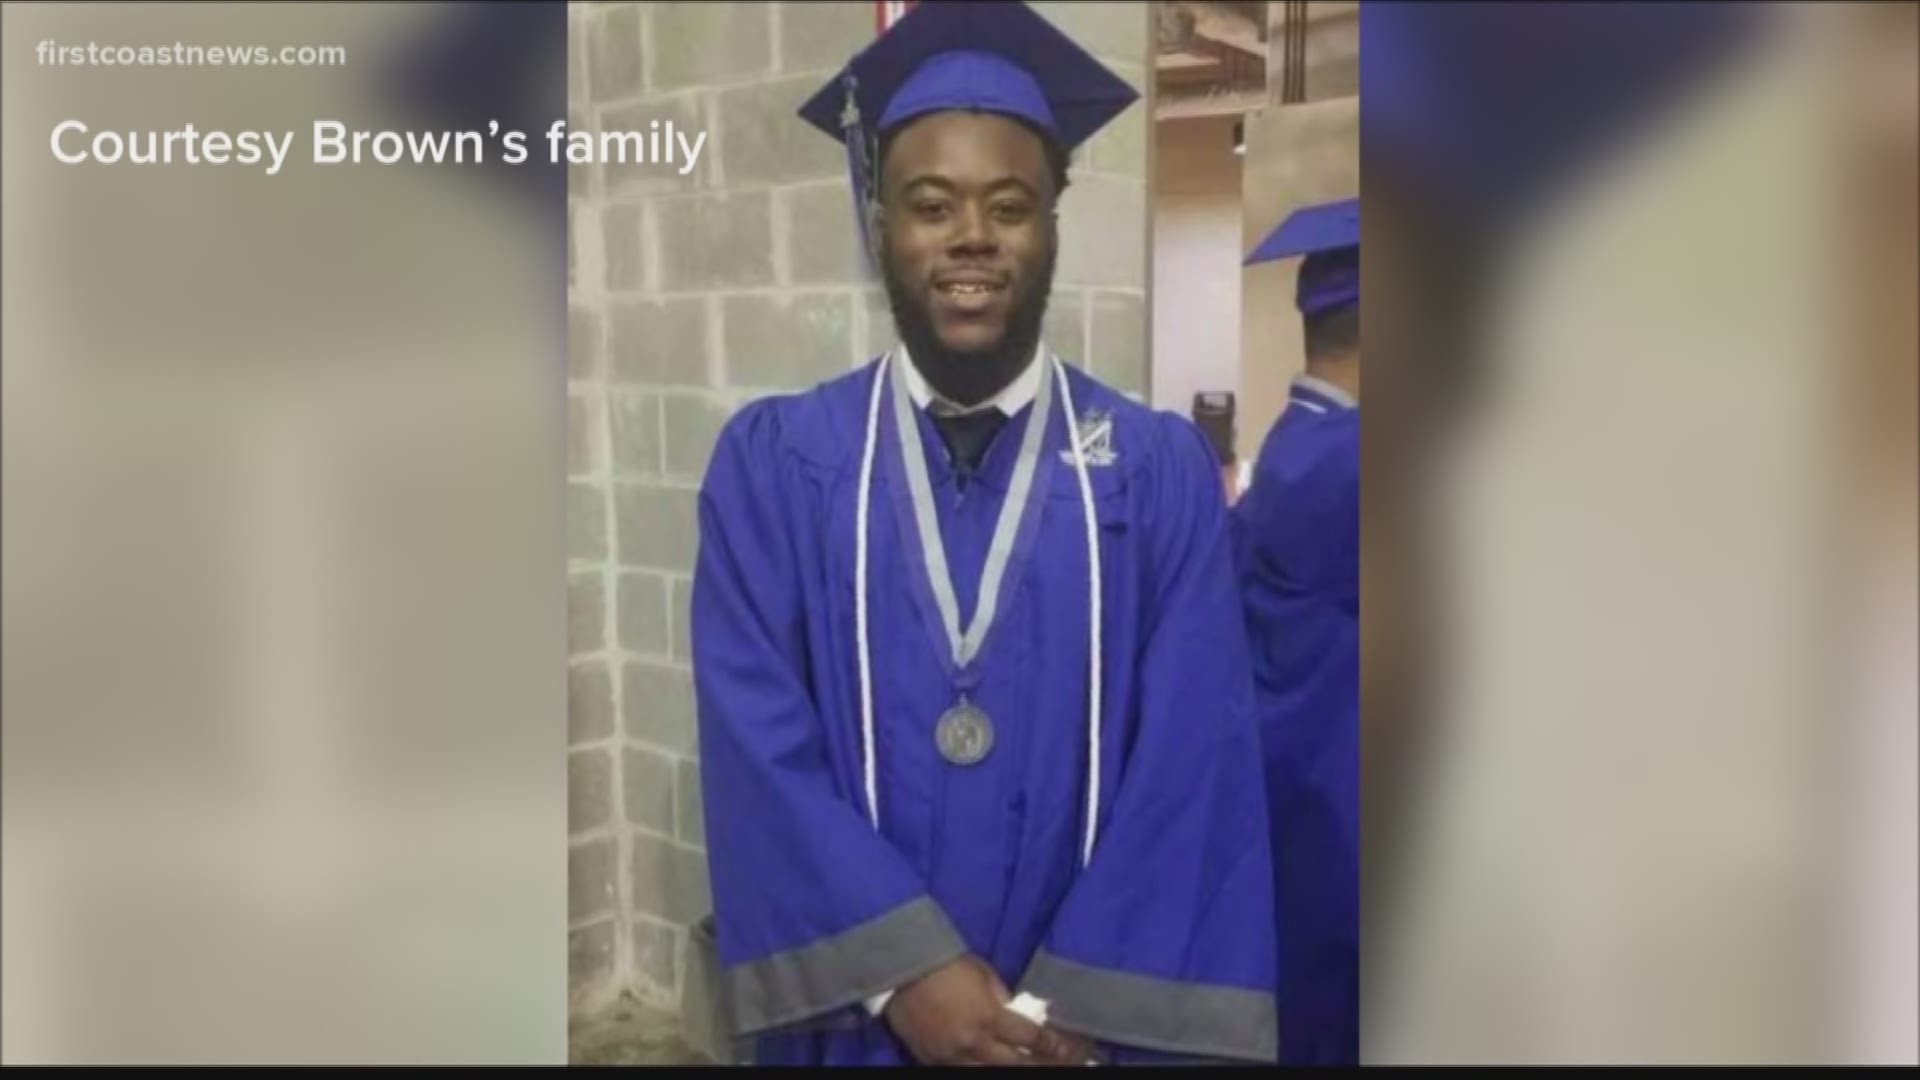 Malik Brown, 18, was reportedly killed in the deadly shooting at an apartment complex in Grand Park, according to a close family friend.